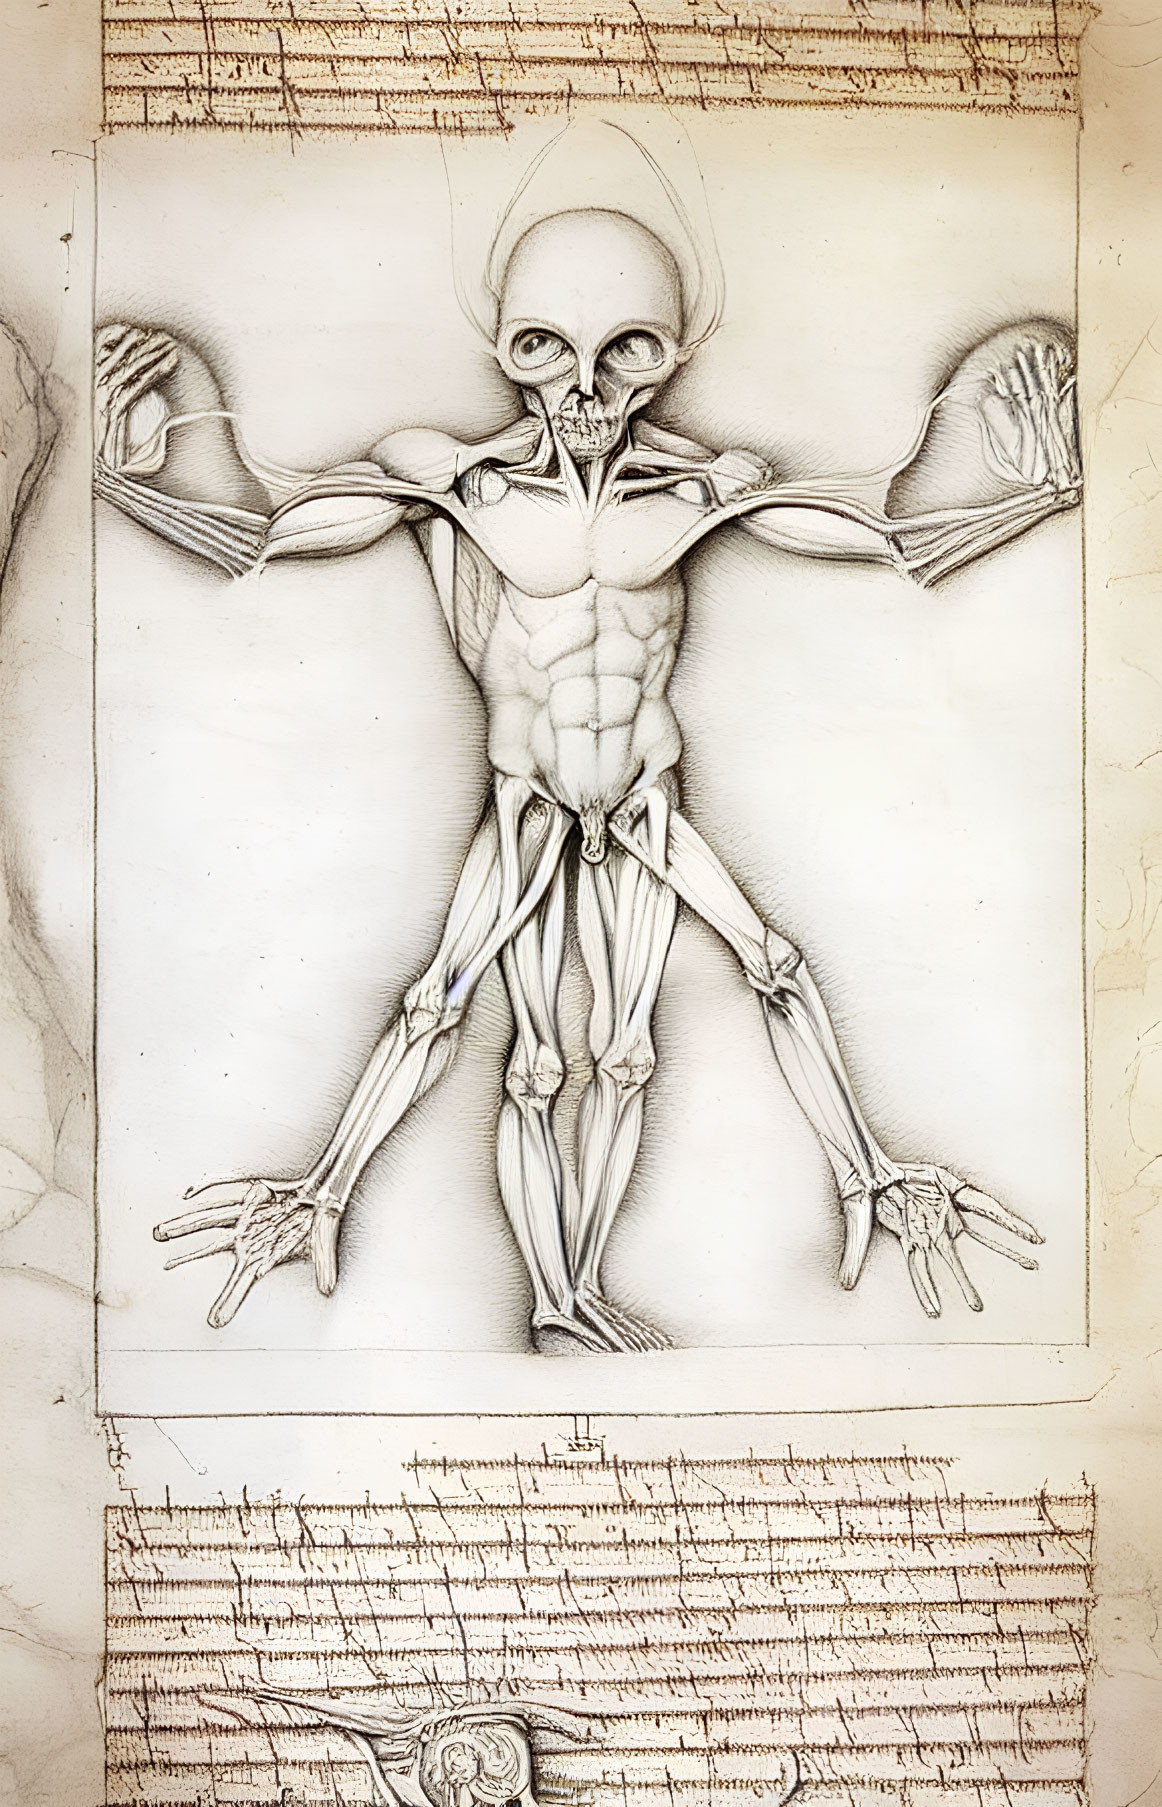 Detailed Anatomical Drawing: Human Figure Revealing Muscles and Bones in Spread-Eagle Pose